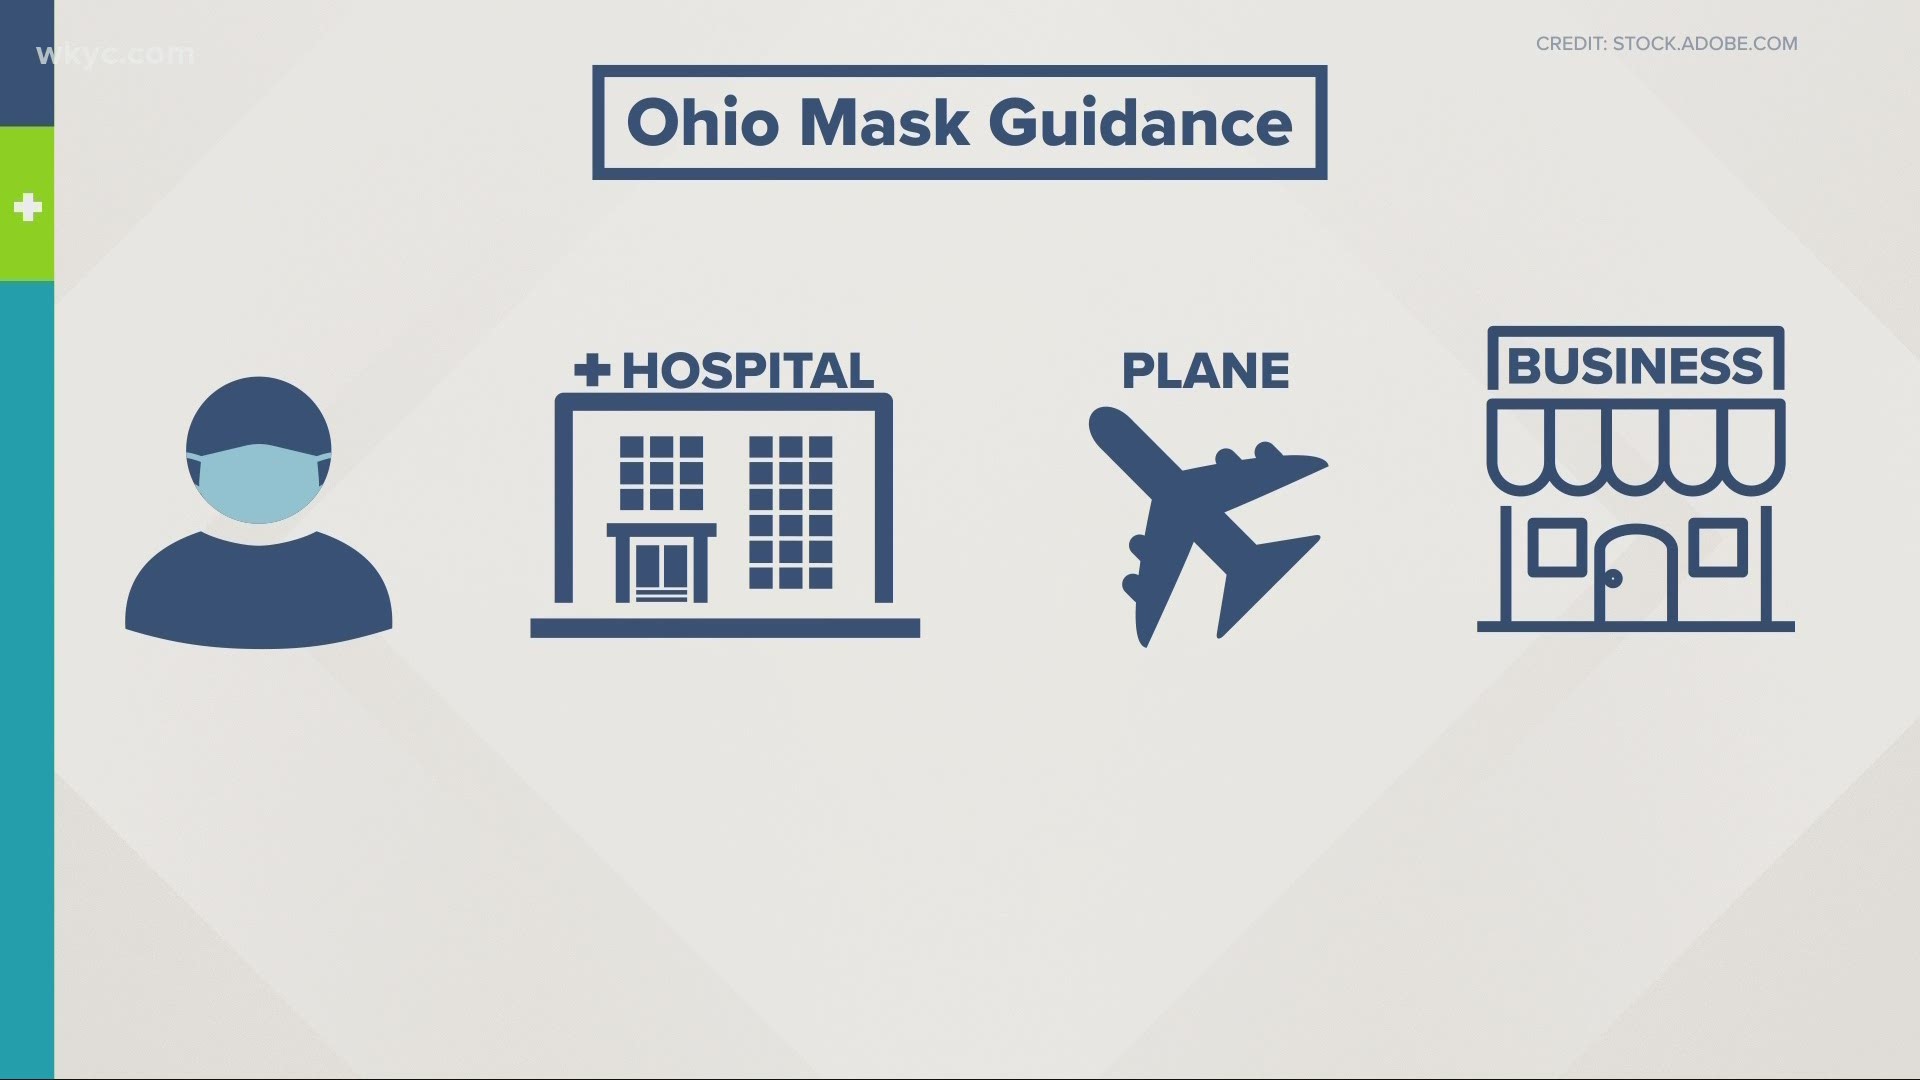 The CDC says those who have been vaccinated no longer need to wear masks, while those who have not been vaccinated should still wear a mask and socially distance.